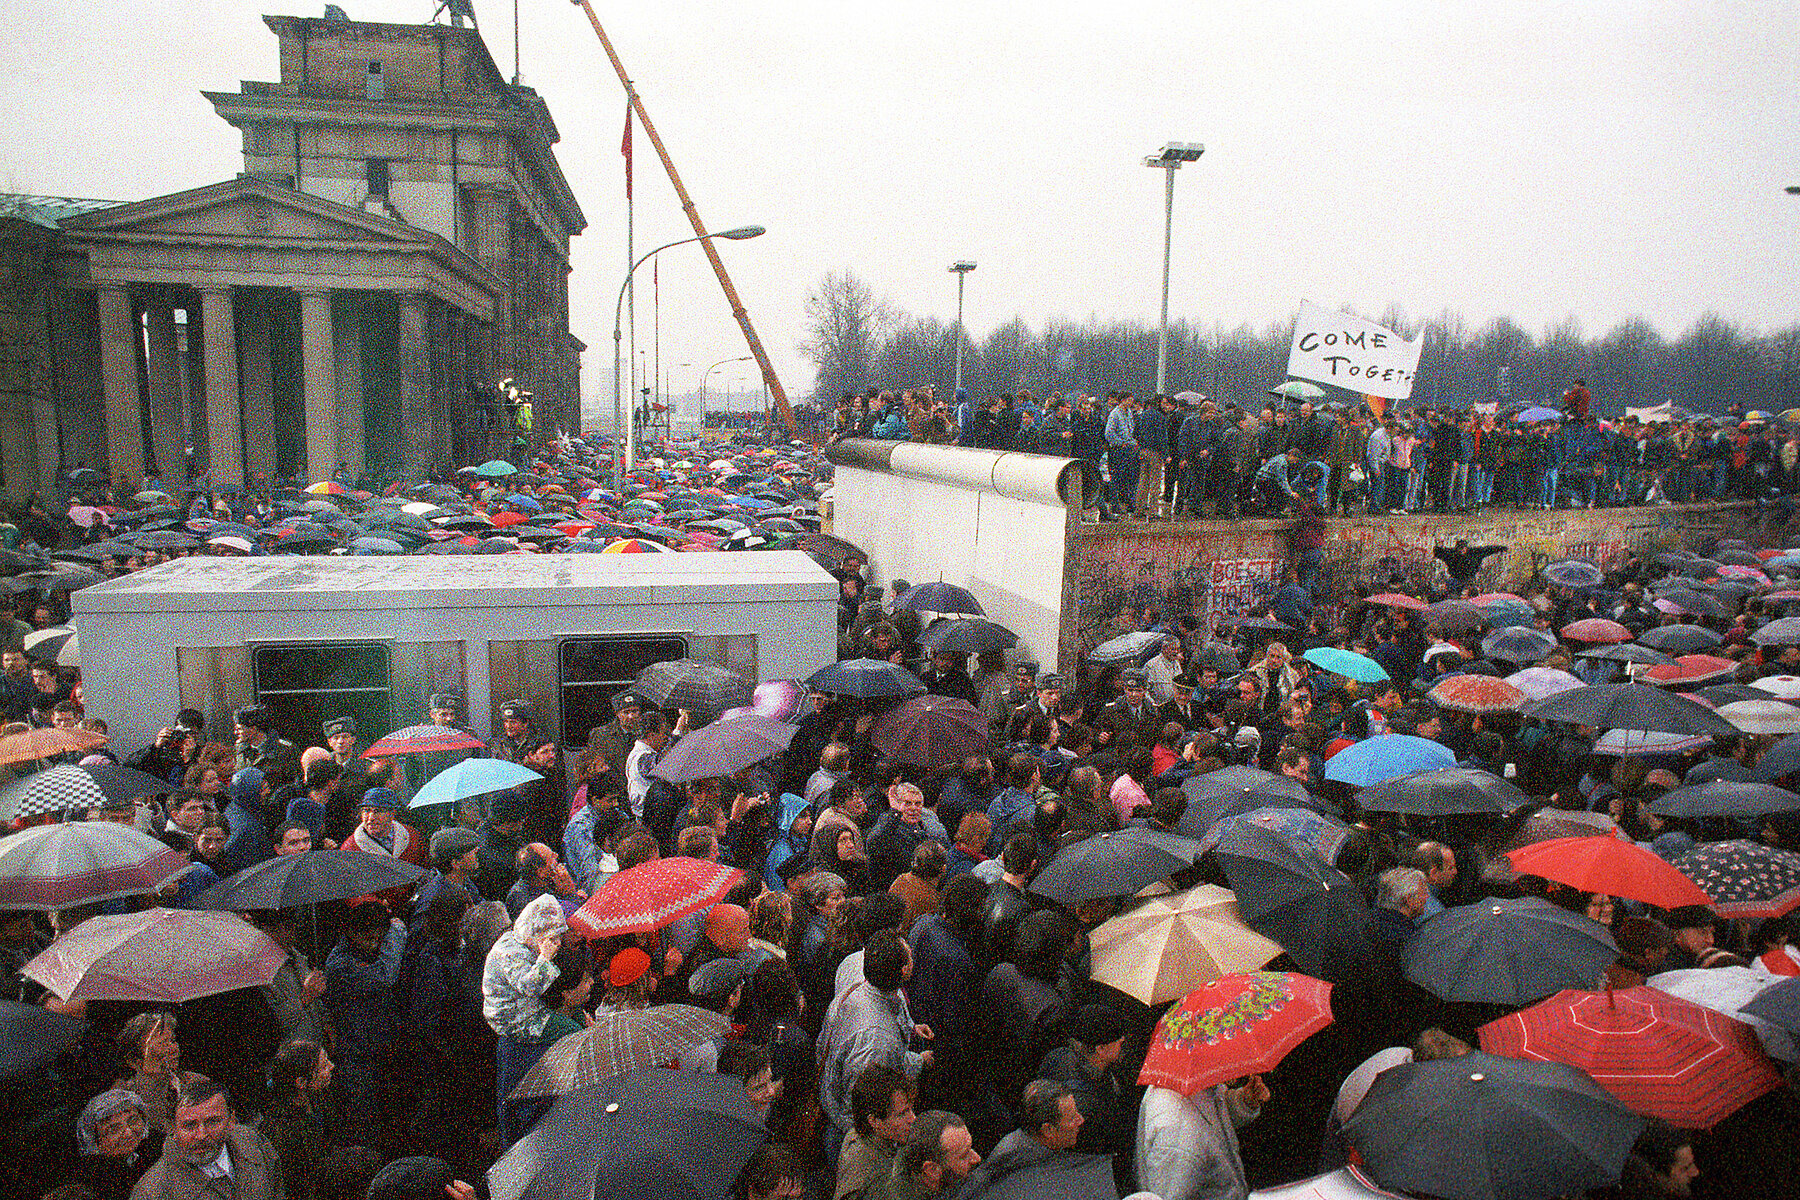 A container located to the side of the Brandenburg Gate is surrounded by many people with umbrellas. People on top of a Wall section hold up a sign that reads Come together.